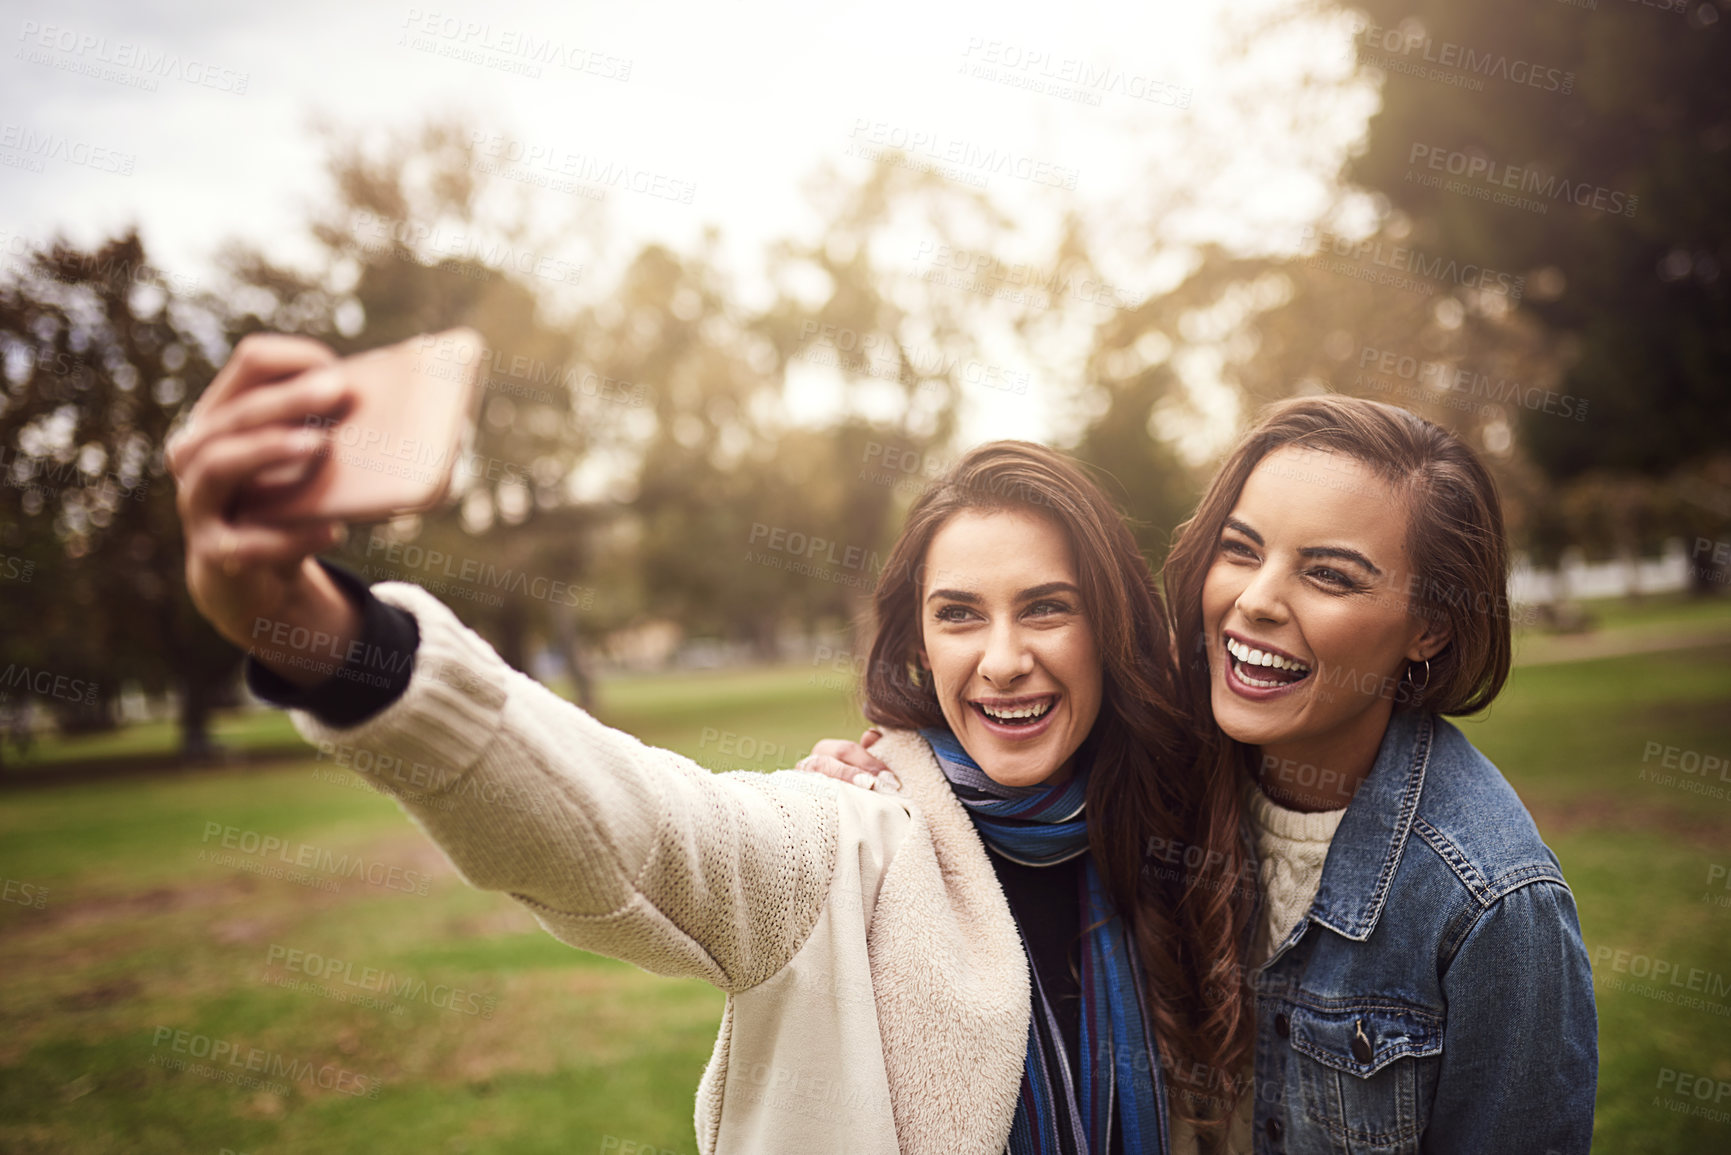 Buy stock photo Shot of two cheerful young friends taking a self portrait together outside in a park